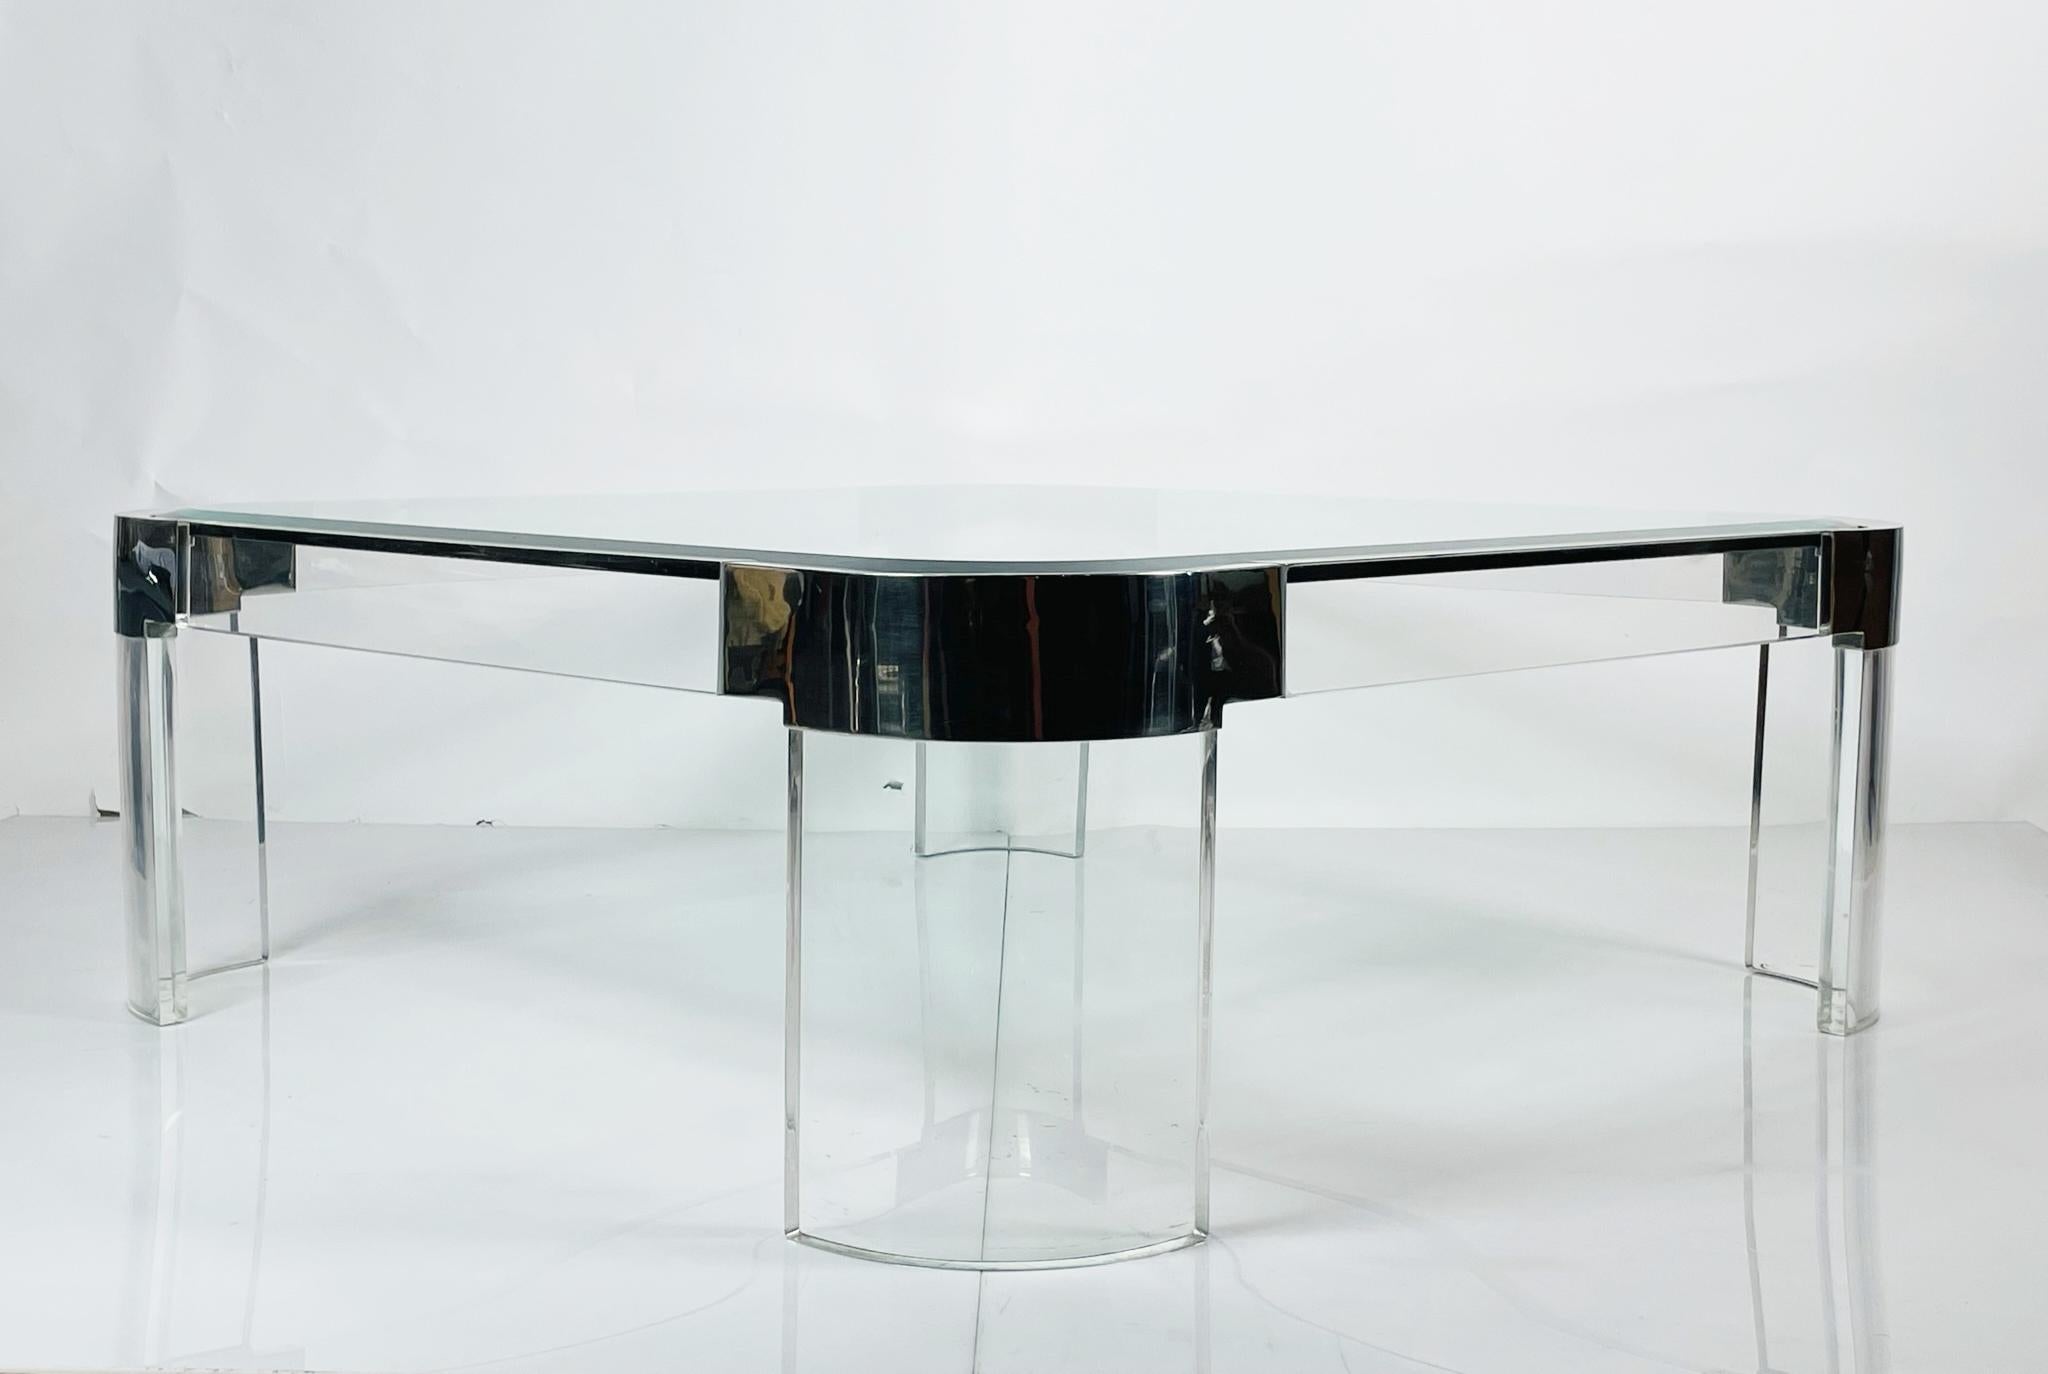 Sleek coffee table executed in Lucite, polished nickel and a thick glass with a beveled edge.

The table was designed in the 1970s by the Lucite icon, Charles Hollis Jones. The table is part of Charles Hollis Jones -Waterfall- line which it was